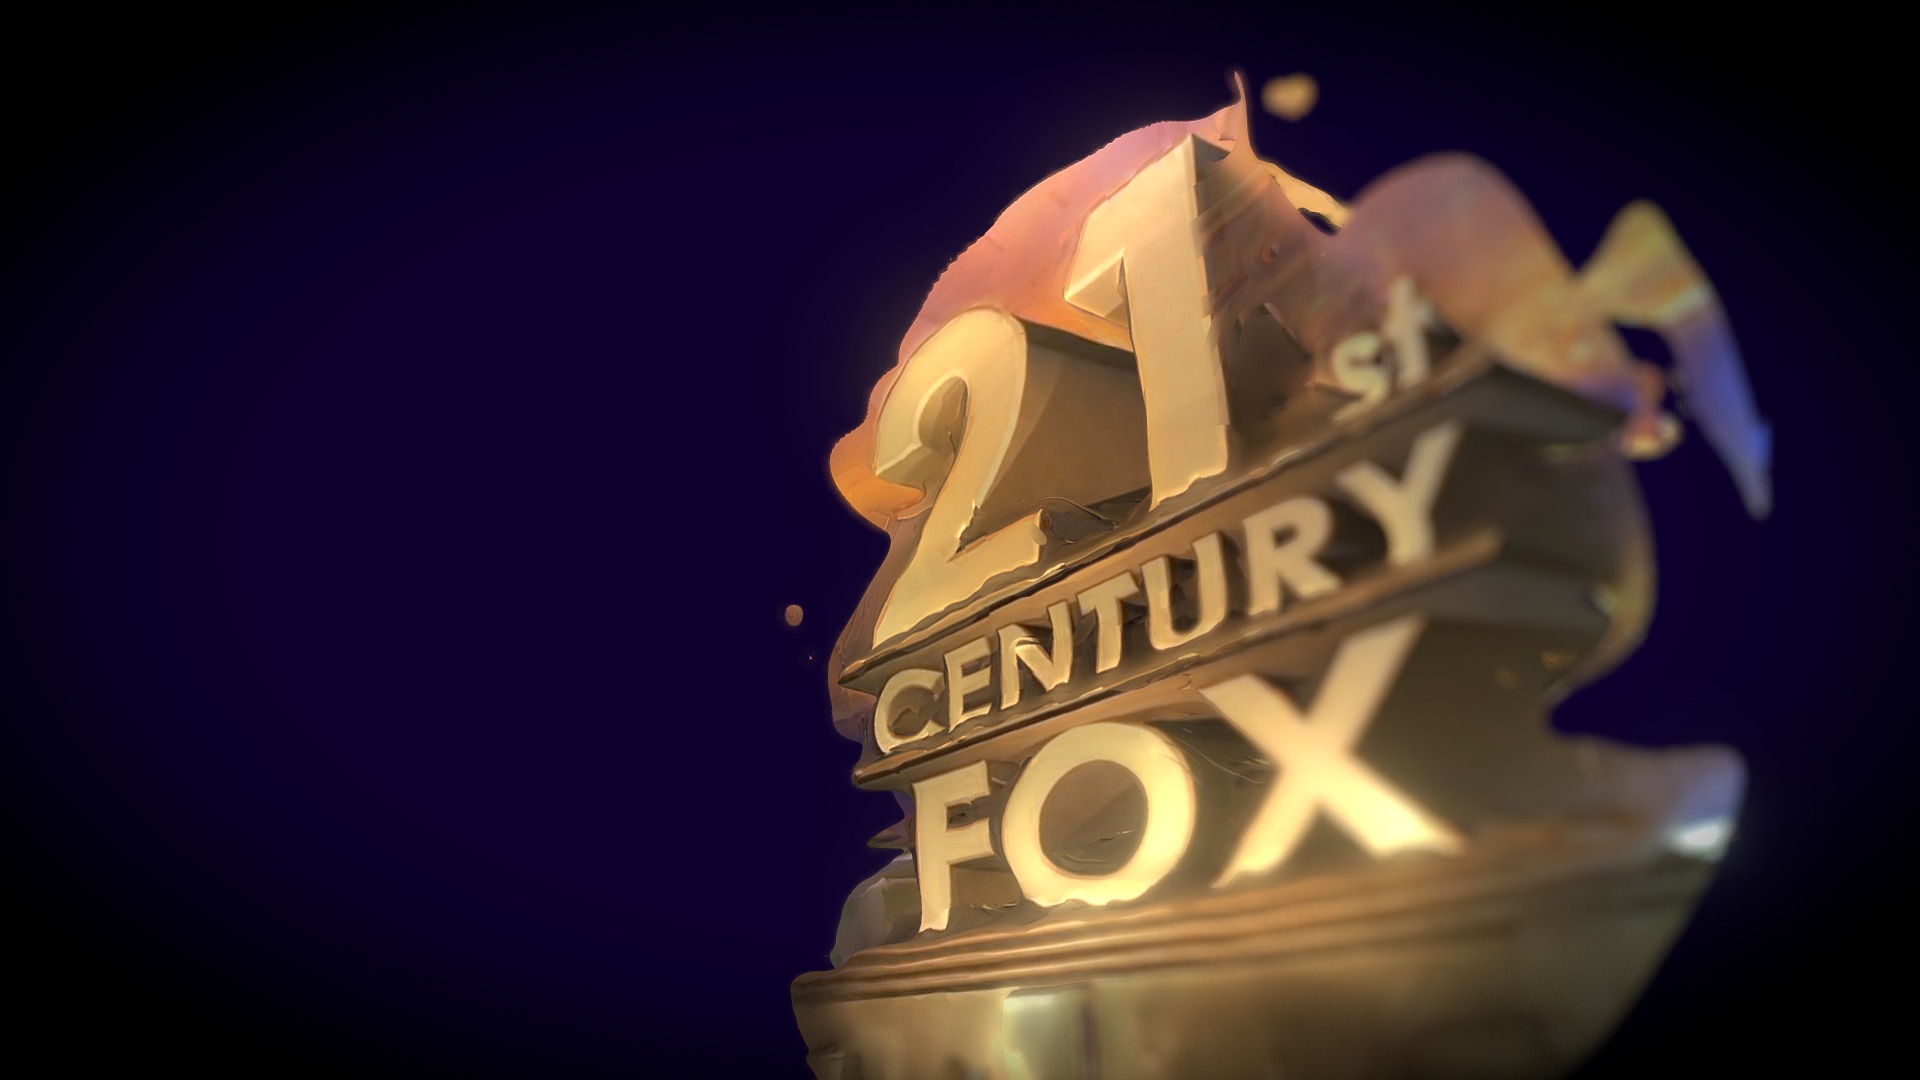 21 Century Fox - Download Free 3D model by Nikitos & 3130 (@vrcityphoto...